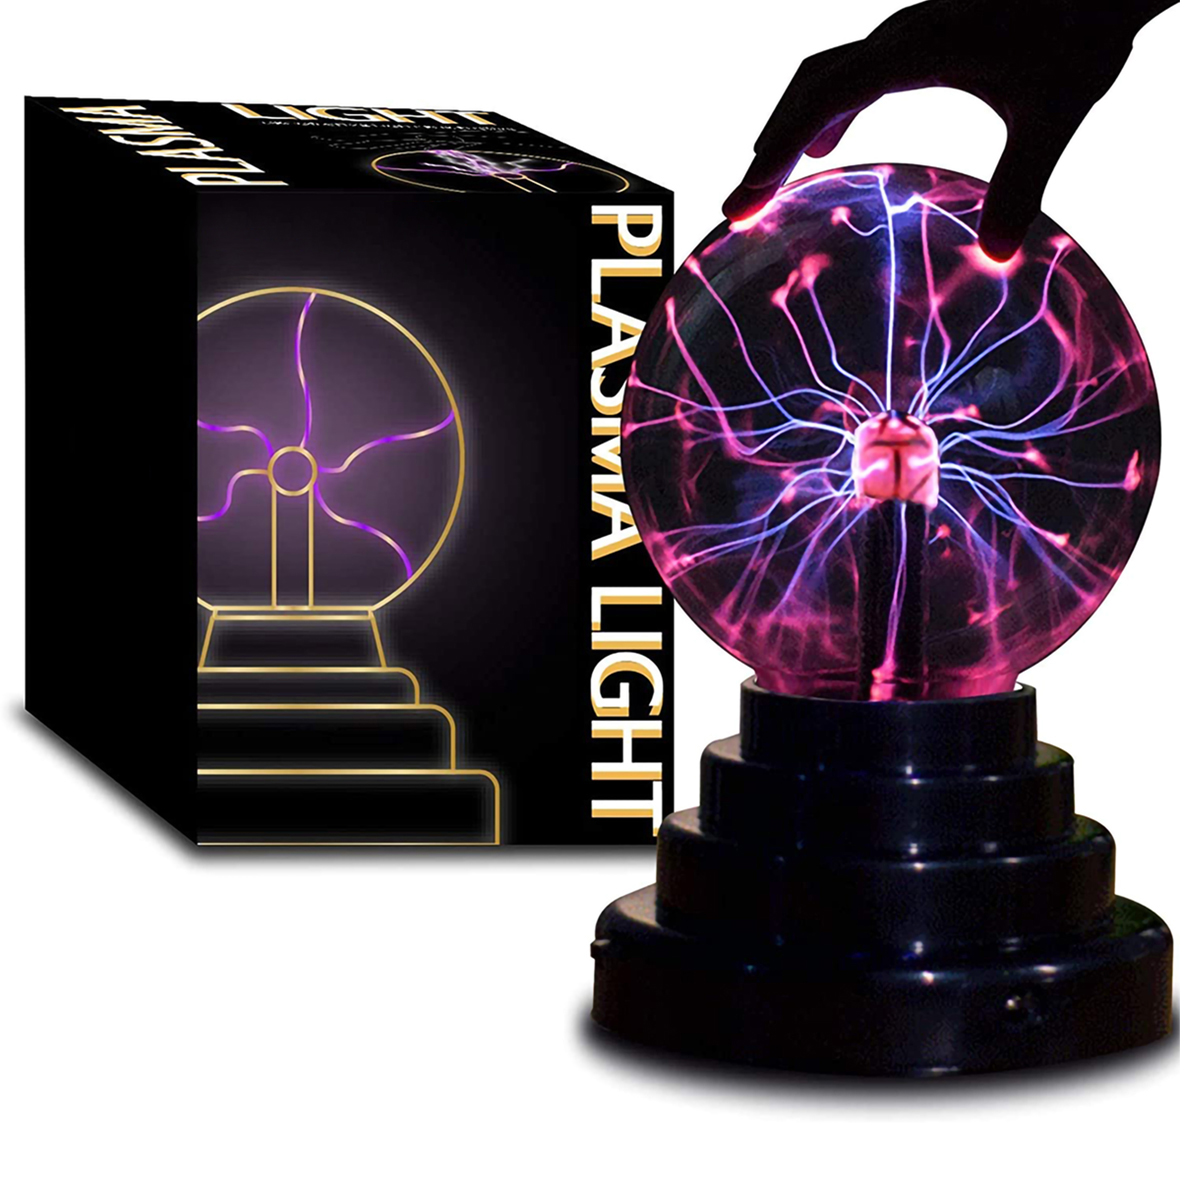 3 inch plasma ball with red light